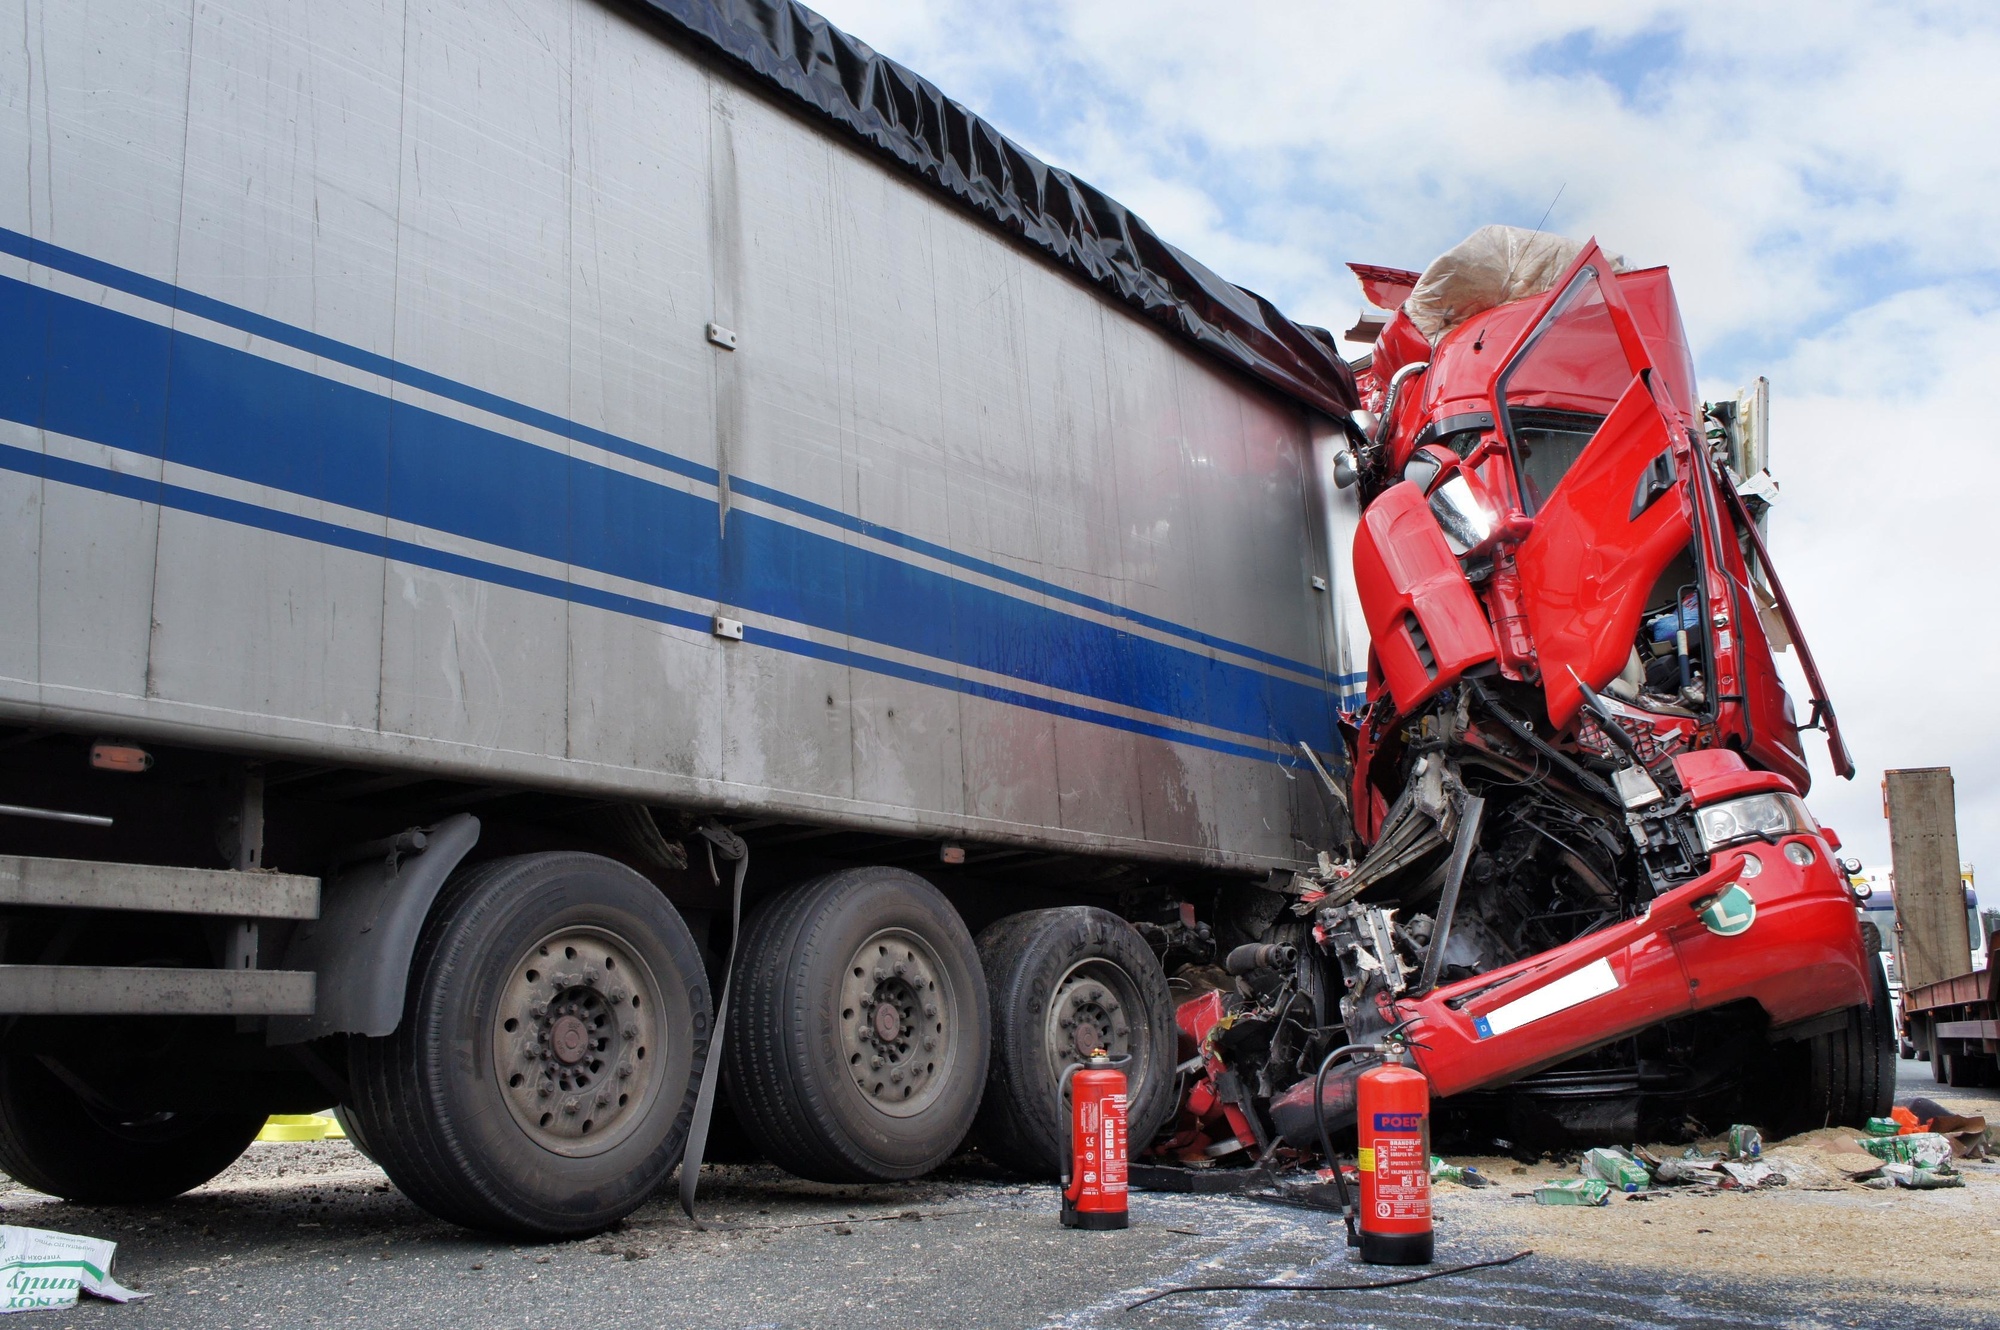 Do you need help with finding a truck accident lawyer? Here's a valuable guide on selecting the most suitable attorney for you.